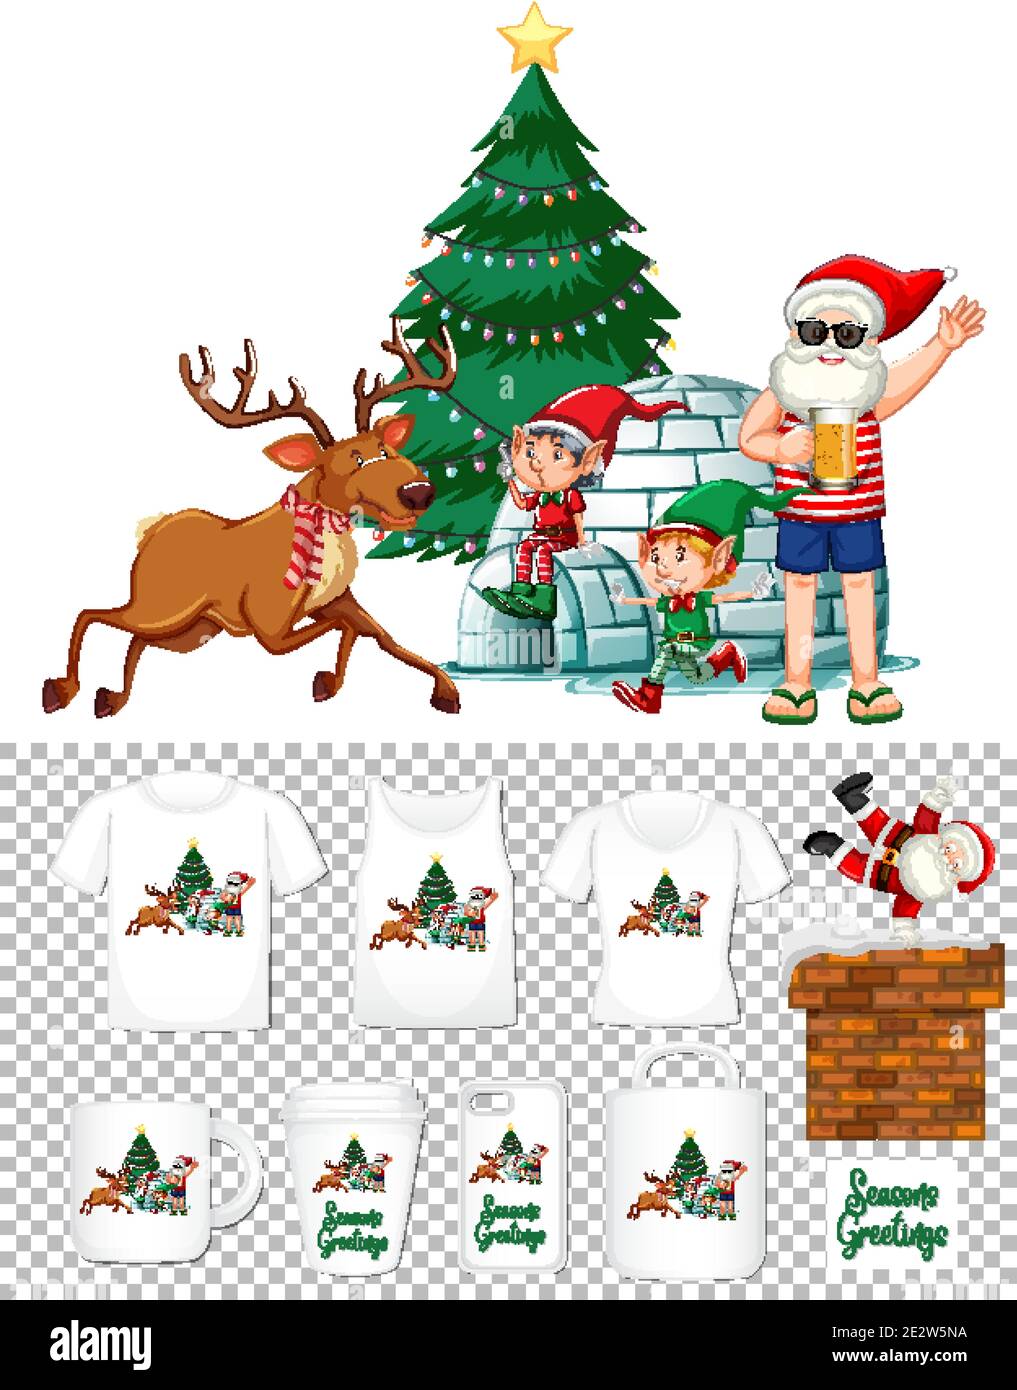 Santa Claus dancing cartoon character with set of different clothes and accessories products on transparent background illustration Stock Vector